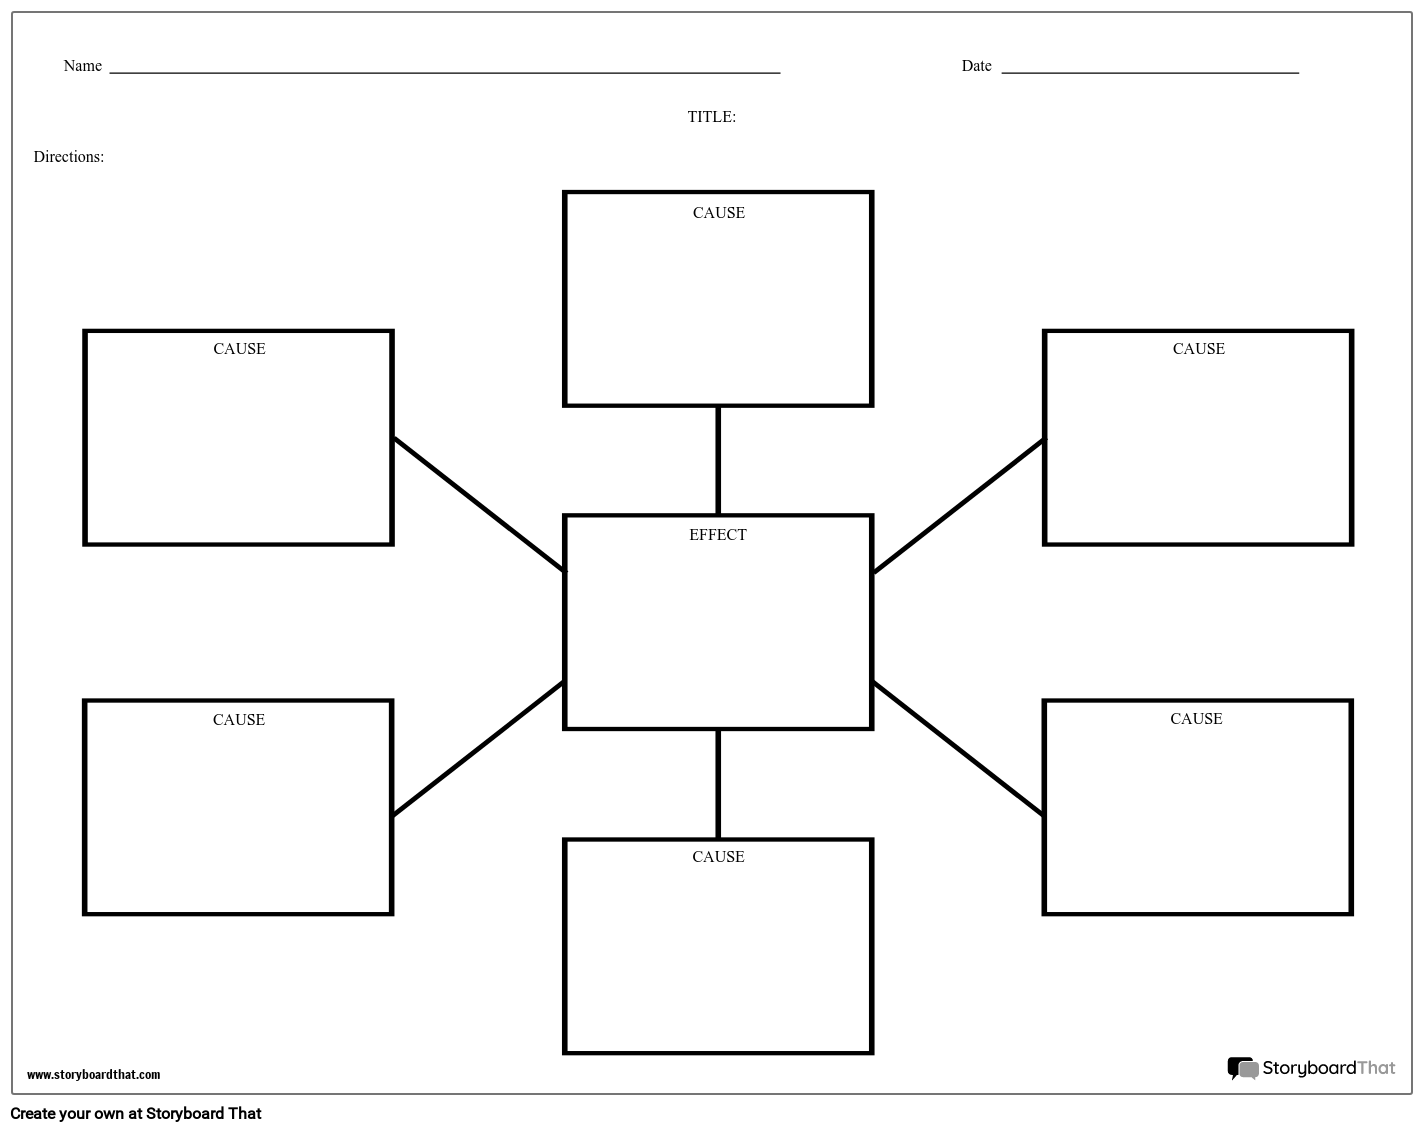 Cause and Effect Worksheet Template with Connected Boxes